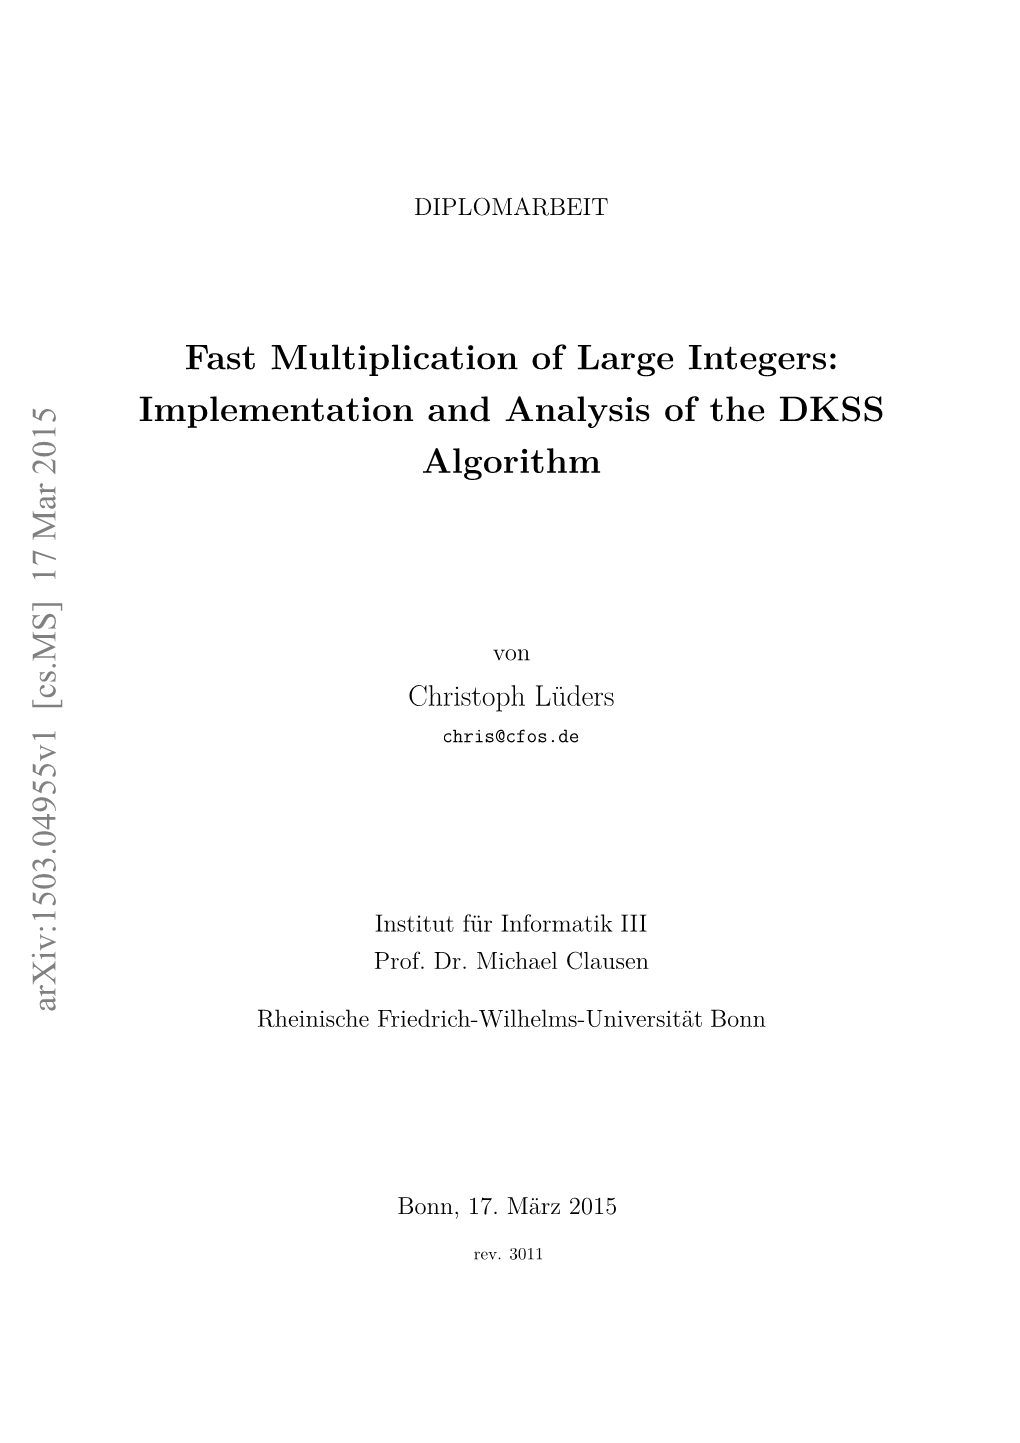 Implementation and Analysis of the DKSS Algorithm